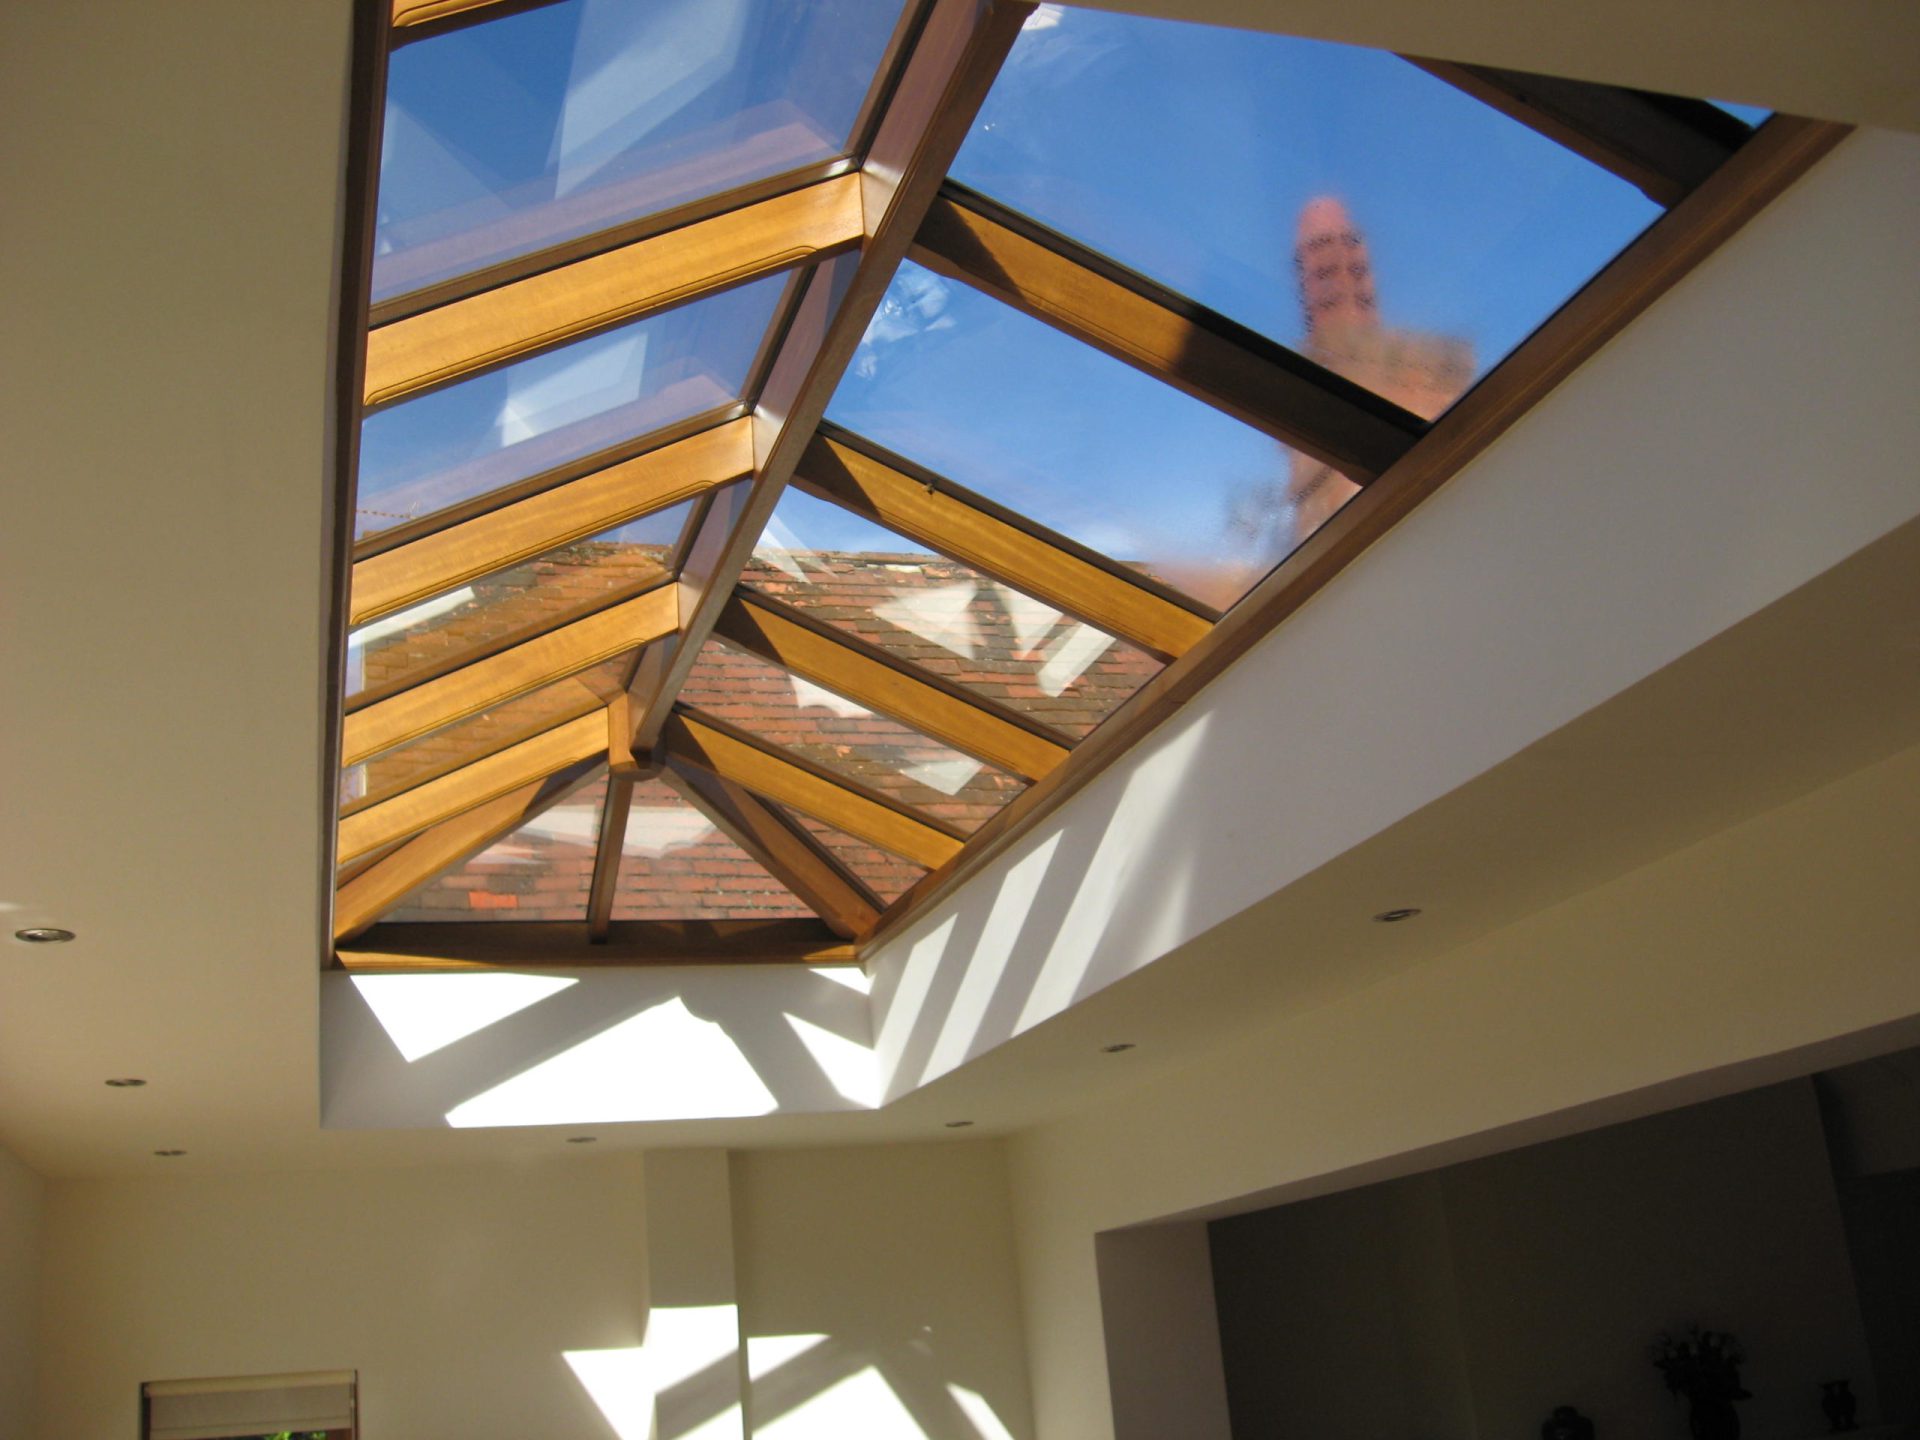 A Lantern roof of a conservatory